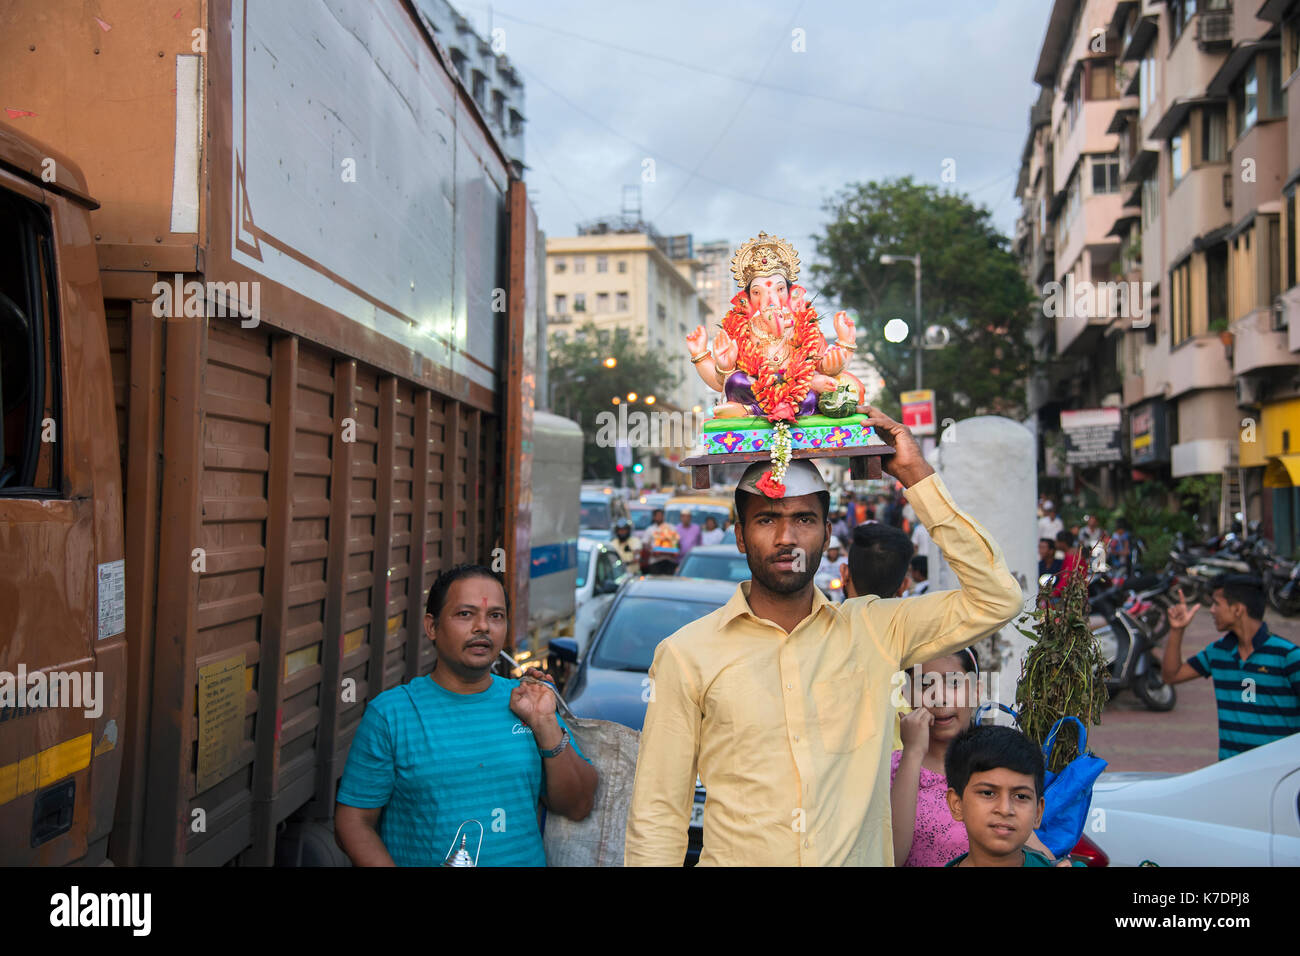 The image of Devotee carrying Ganpati or Elephant headed lords idol  on the way to immersion at Giraguam Chowpatty.Mumbai, India Stock Photo